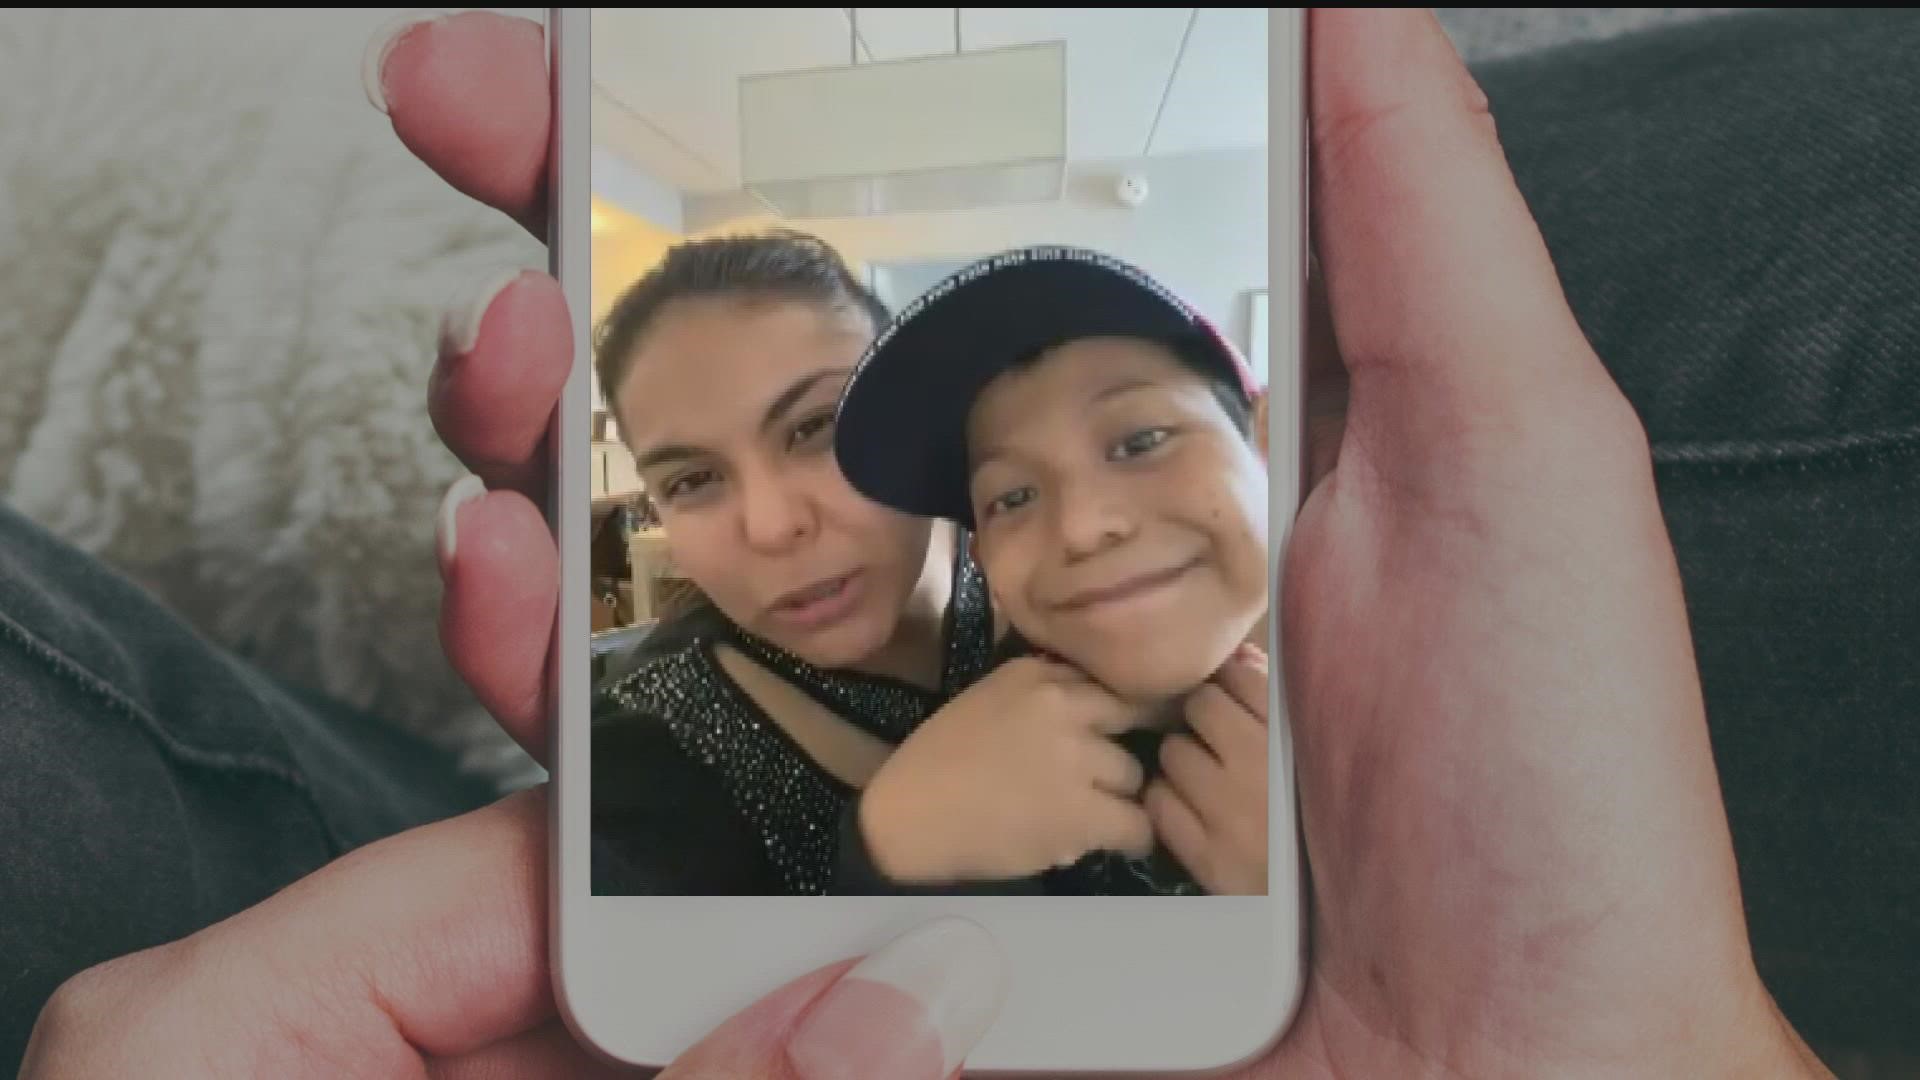 In Communities that KARE, a 9-year-old who needs a blood stem cell transplant is traveling the country to find donors, not just for him but for others too.